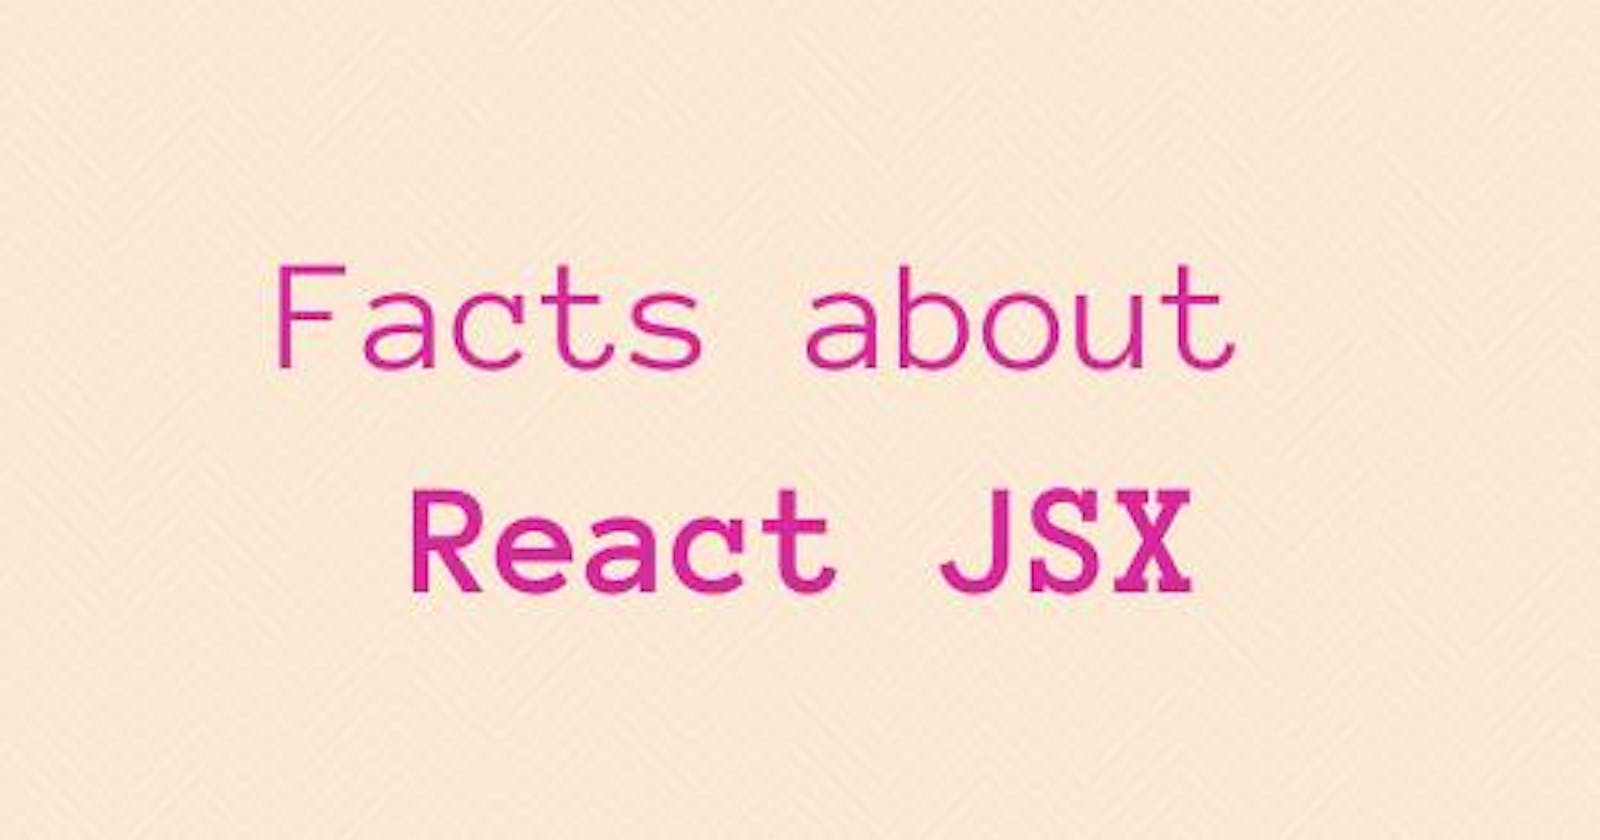 Facts about React JXS